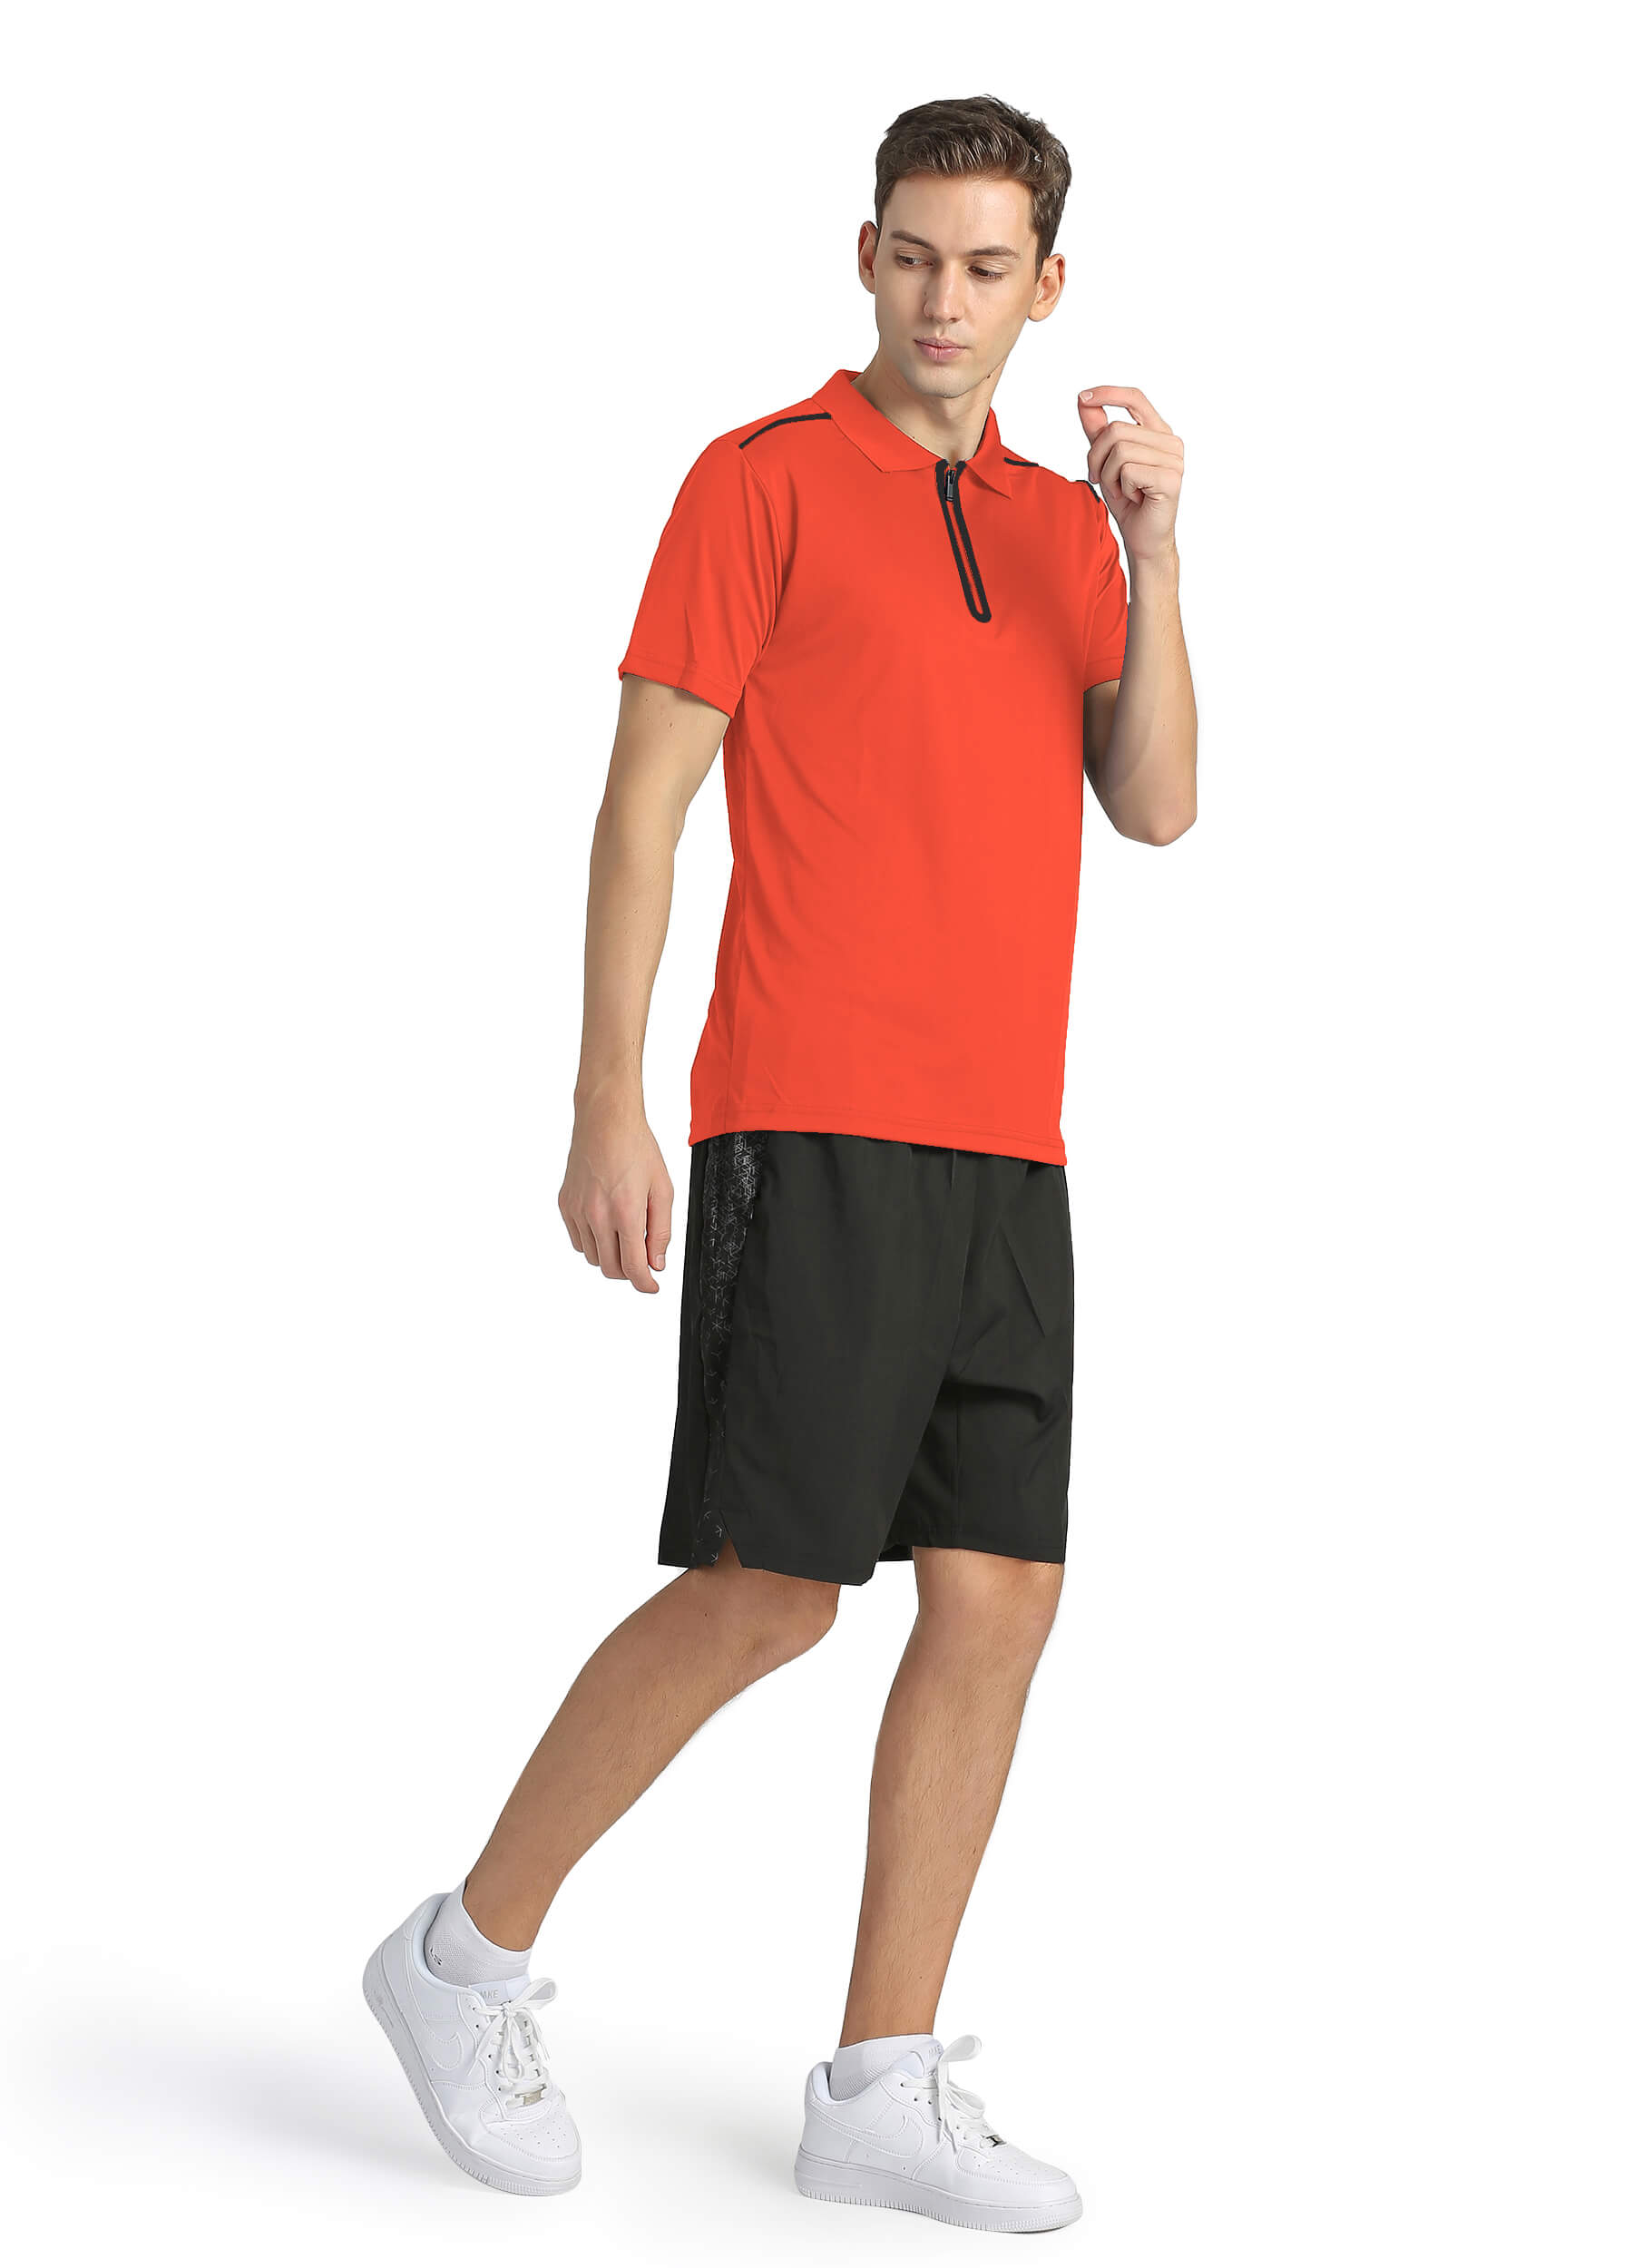 4POSE Men's Orange Moisture Wicking Quick Dry Golf Workout Polo Shirt (Clearance)